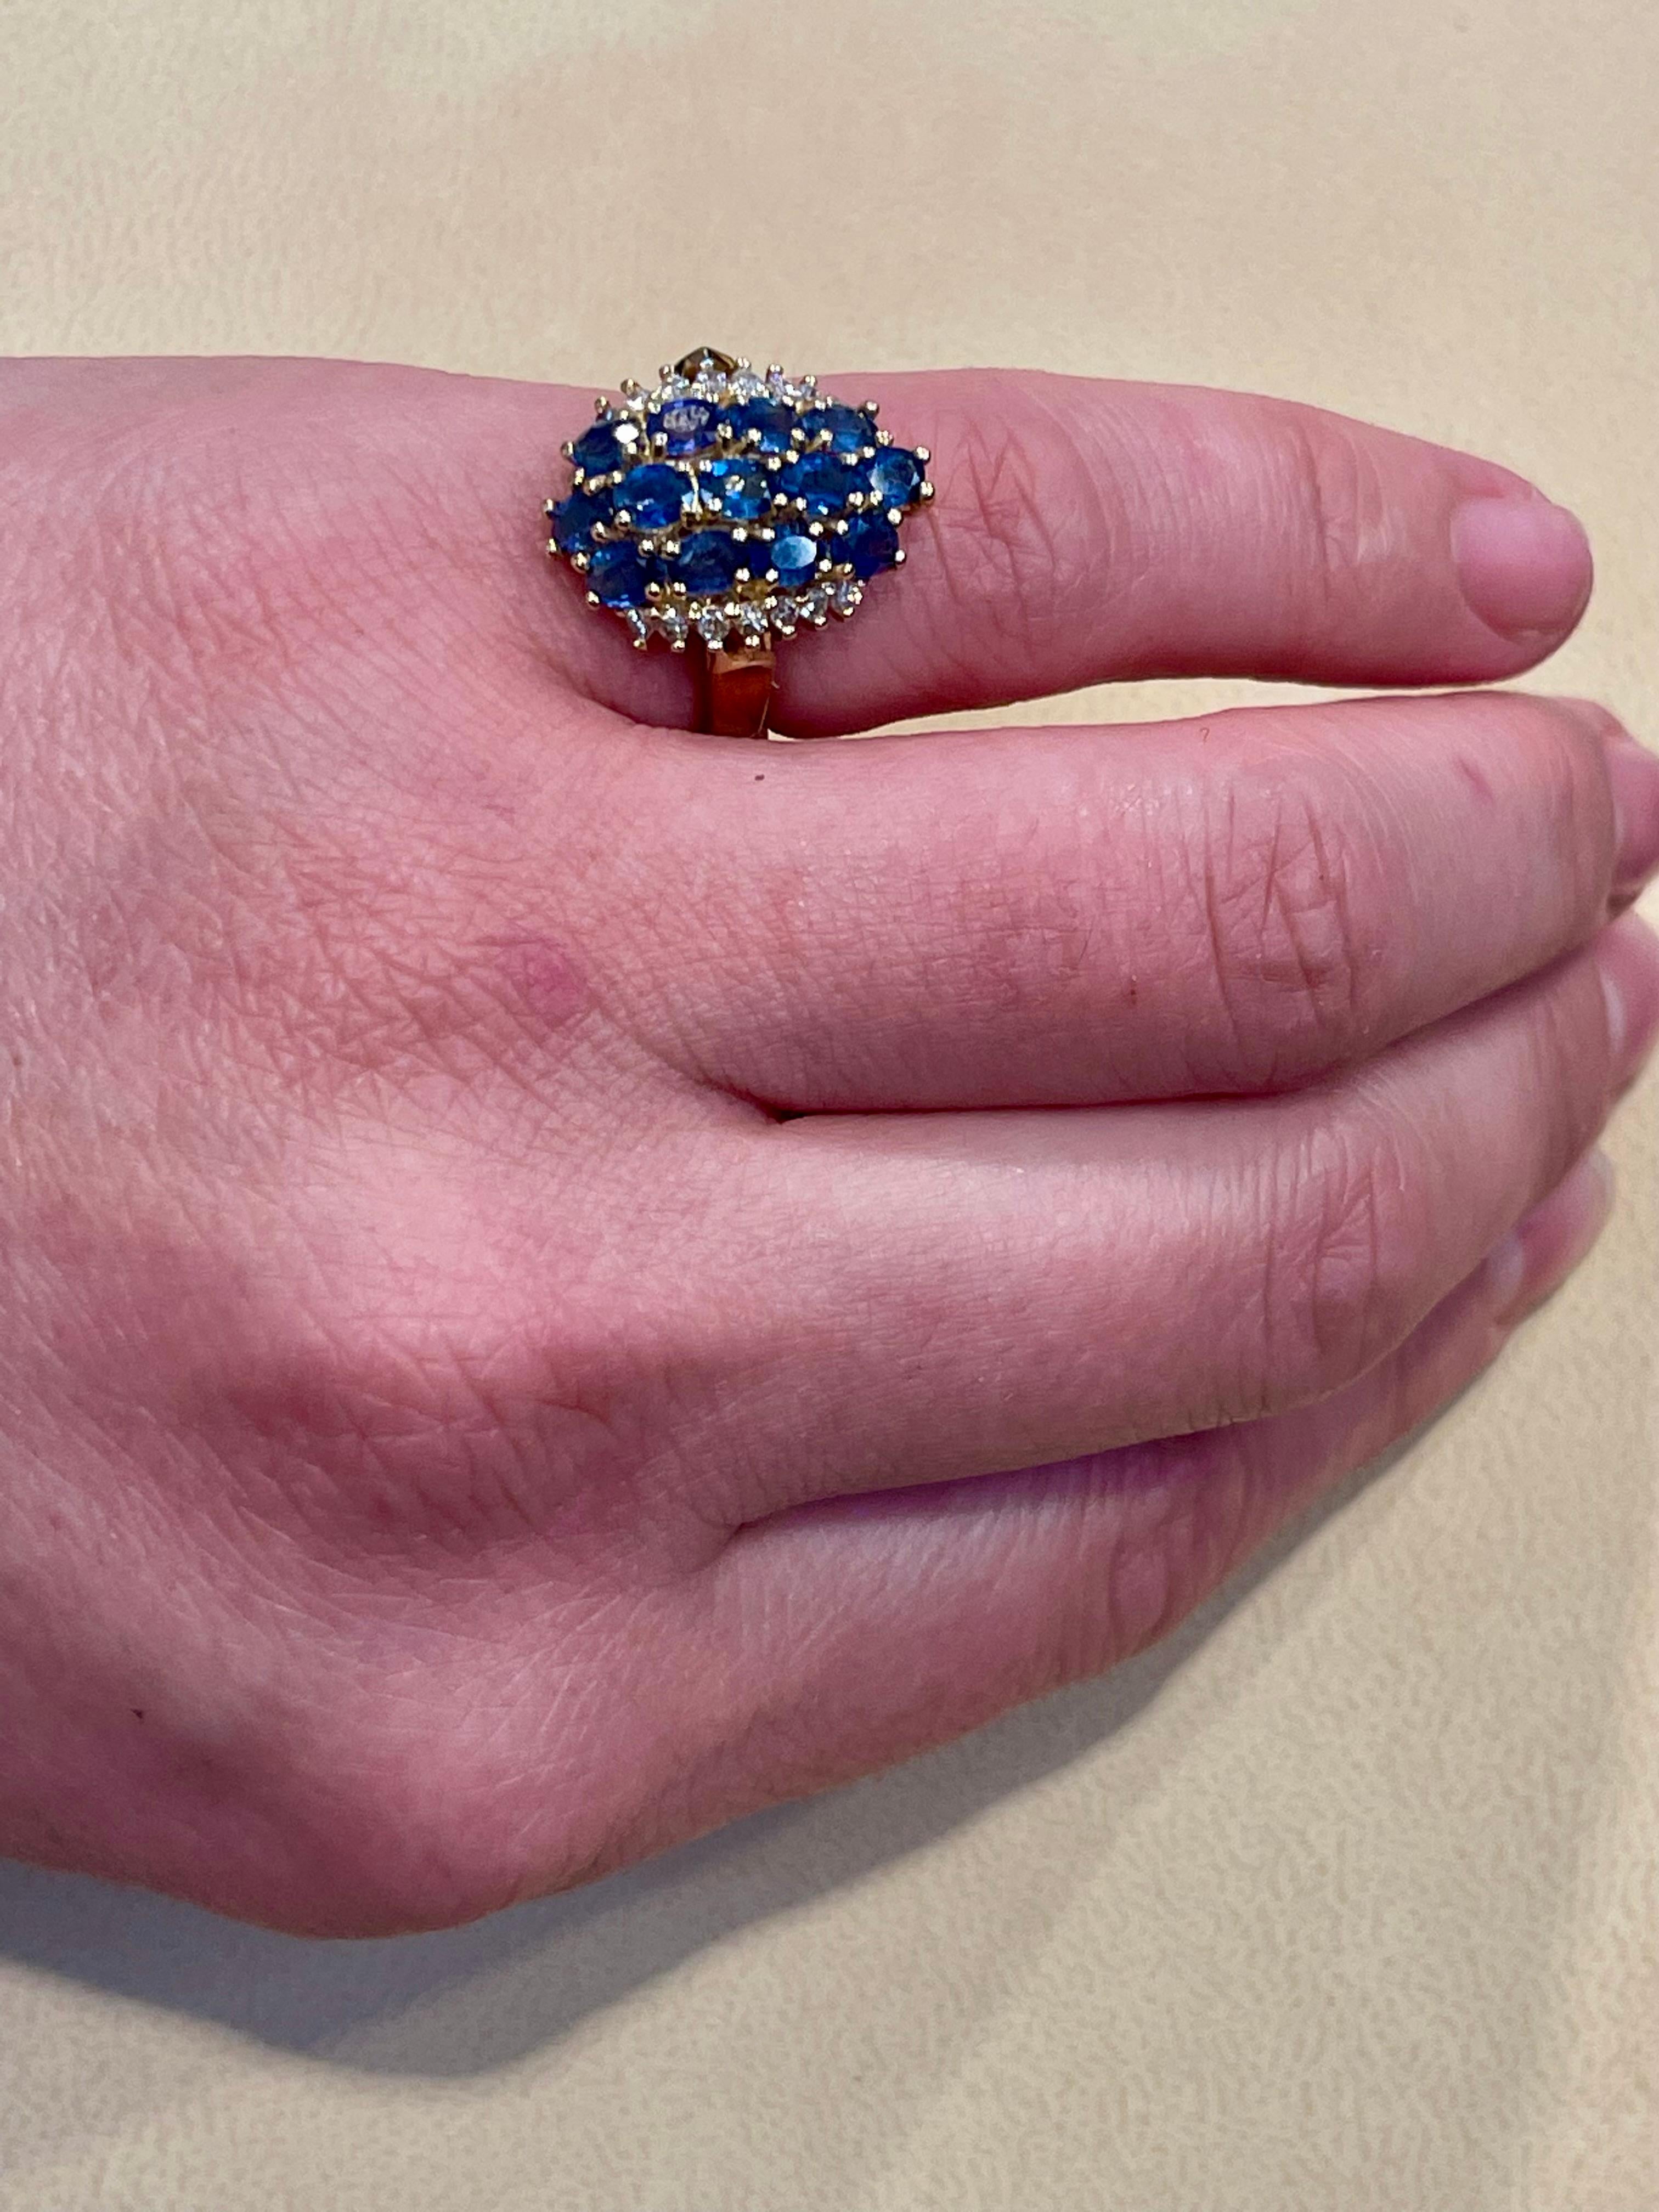 2 Carat Oval Blue Sapphire and Diamond Cocktail Ring in 14 Karat Gold Estate For Sale 5